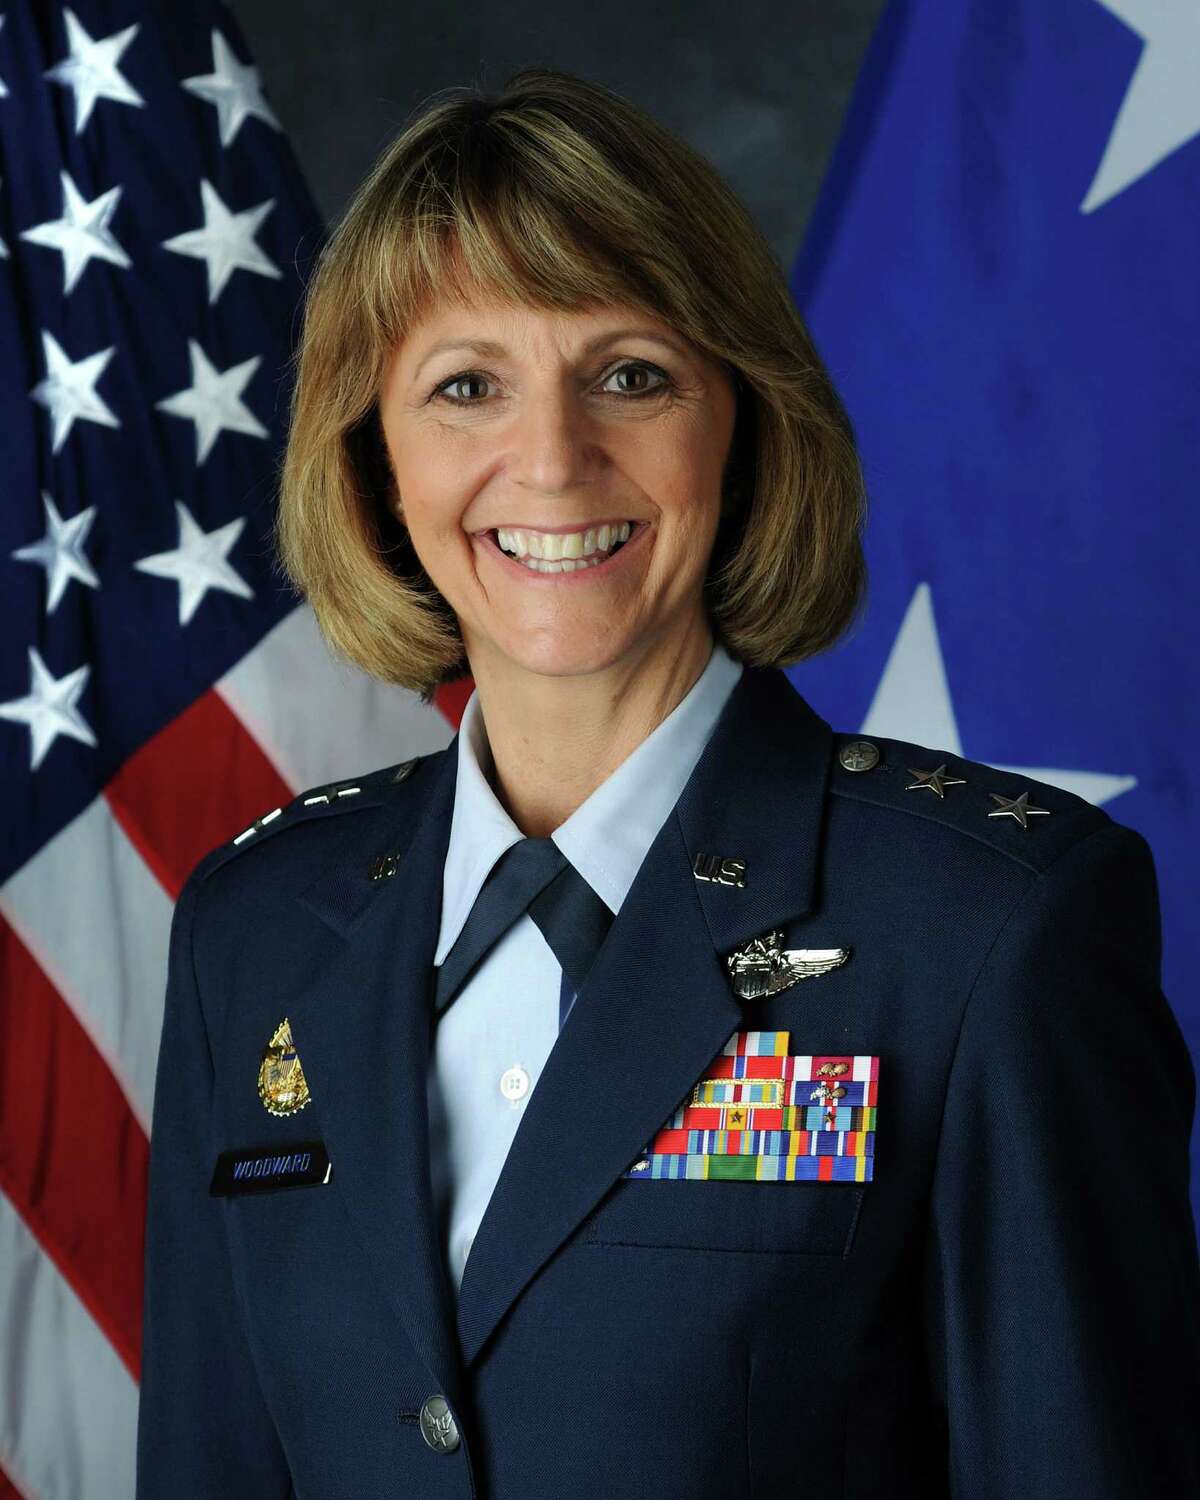 Maj. Gen. Margaret H. Woodward  will lead the investigation into the scandal. Her review needs to be thorough and transparent.